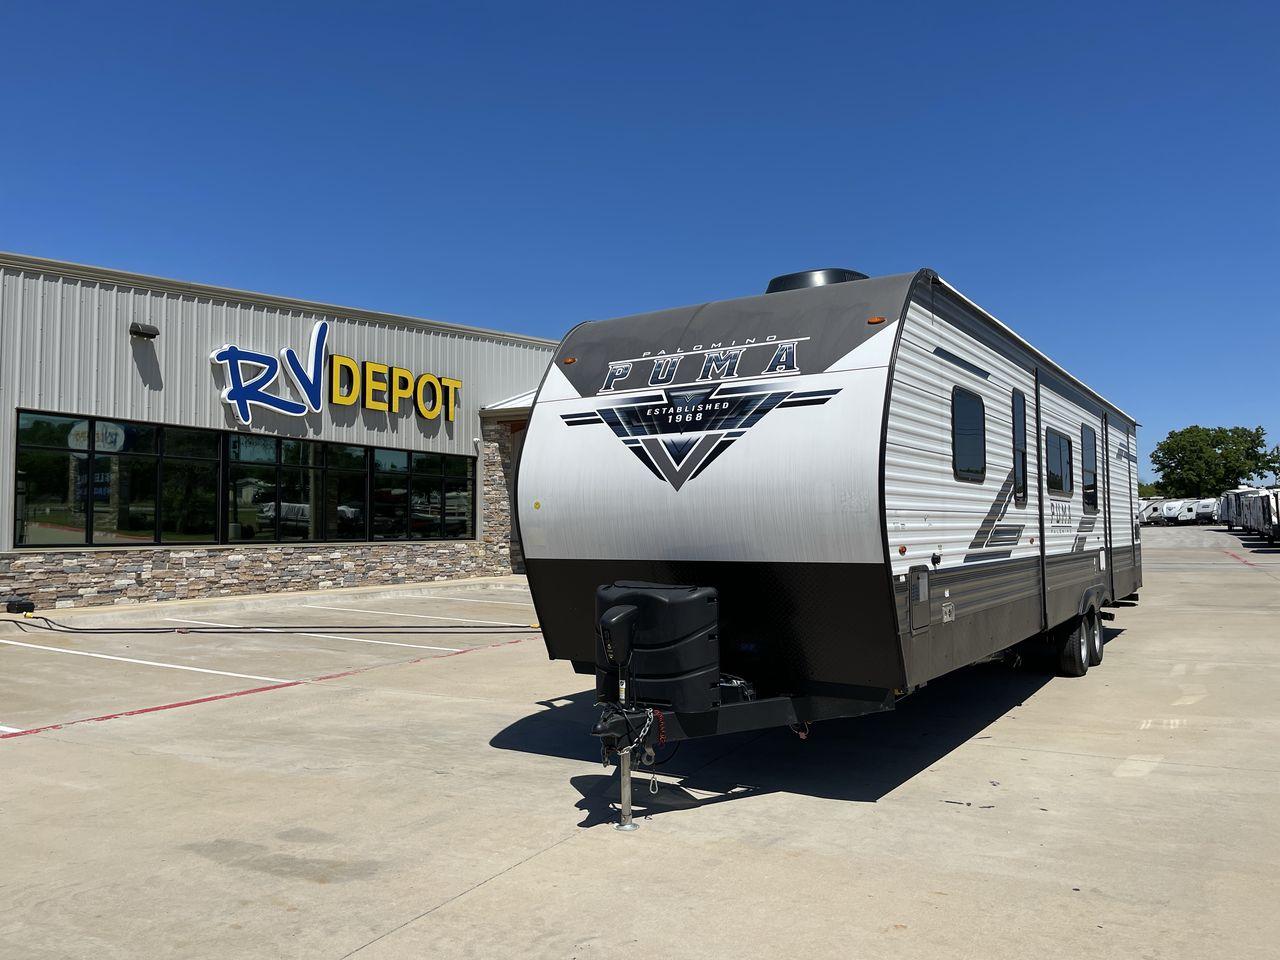 2023 FOREST RIVER PUMA 32BH2B (4X4TPUH21PP) , Length: 38.5 ft. | Dry Weight: 9,023 lbs. | Gross Weight: 11,230 lbs | Slides: 3 transmission, located at 4319 N Main Street, Cleburne, TX, 76033, (817) 221-0660, 32.435829, -97.384178 - With its ample space and adaptability, the 2023 Palomino Puma 32BH2B travel trailer is perfect for hosting extended families and gatherings. This model provides generous living space while maintaining excellent maneuverability on the road. It measures 38.5 feet in length and has a dry weight of 9,02 - Photo #0